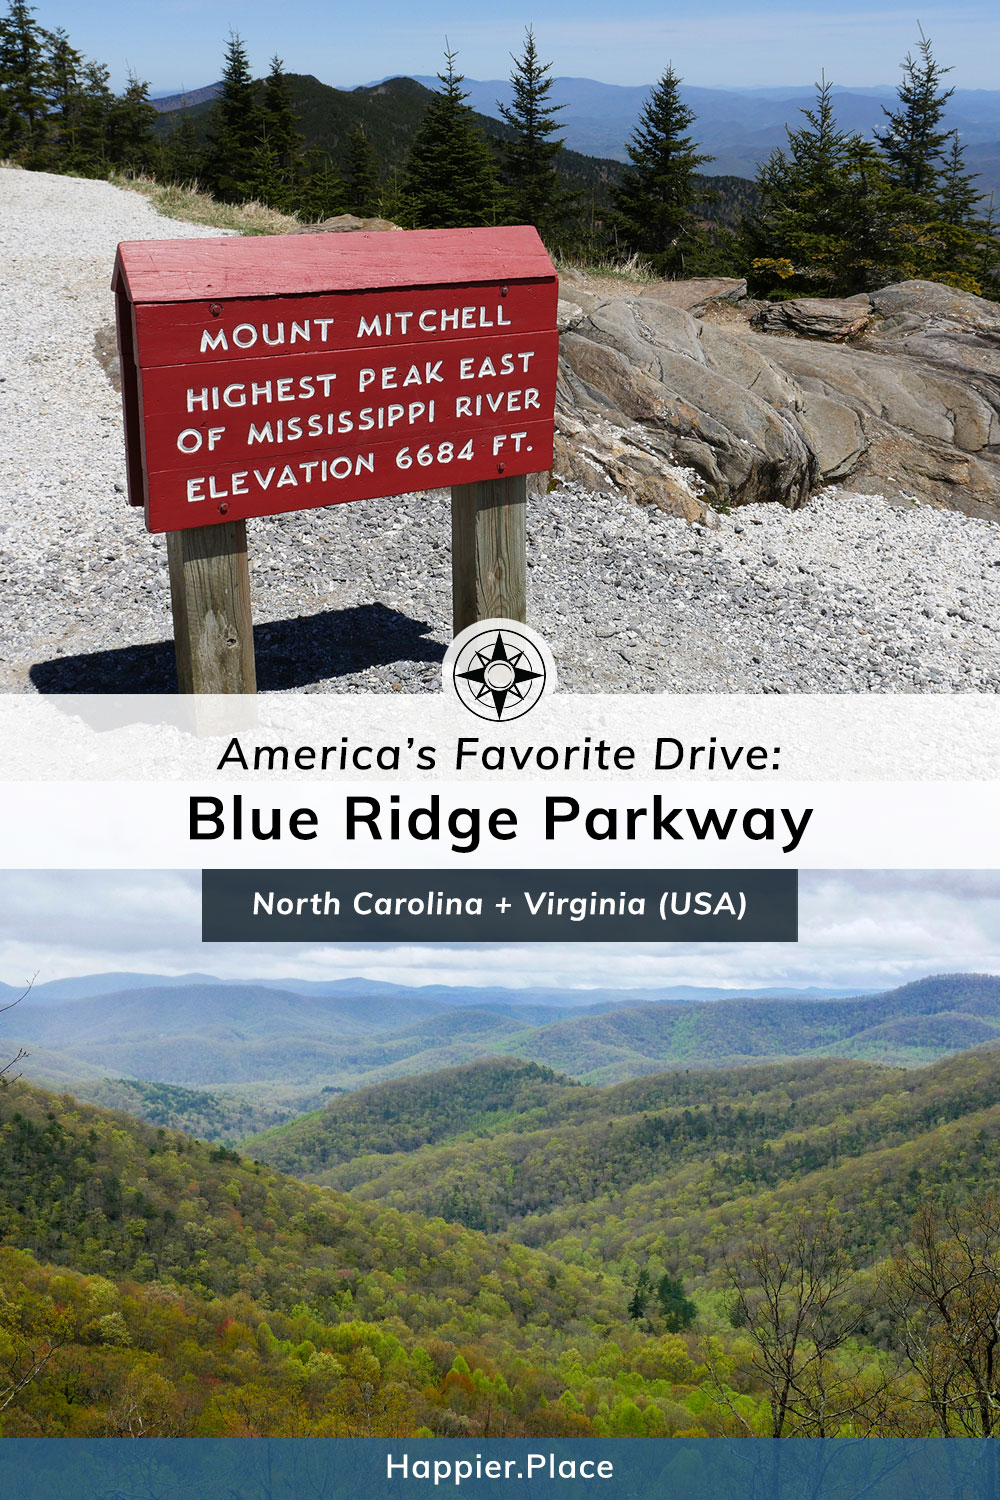 Blue Ridge Parkway: America's Favorite Drive and Longest Linear Park in the USA from Virginia to North Carolina. Mount Mitchell, highest peak